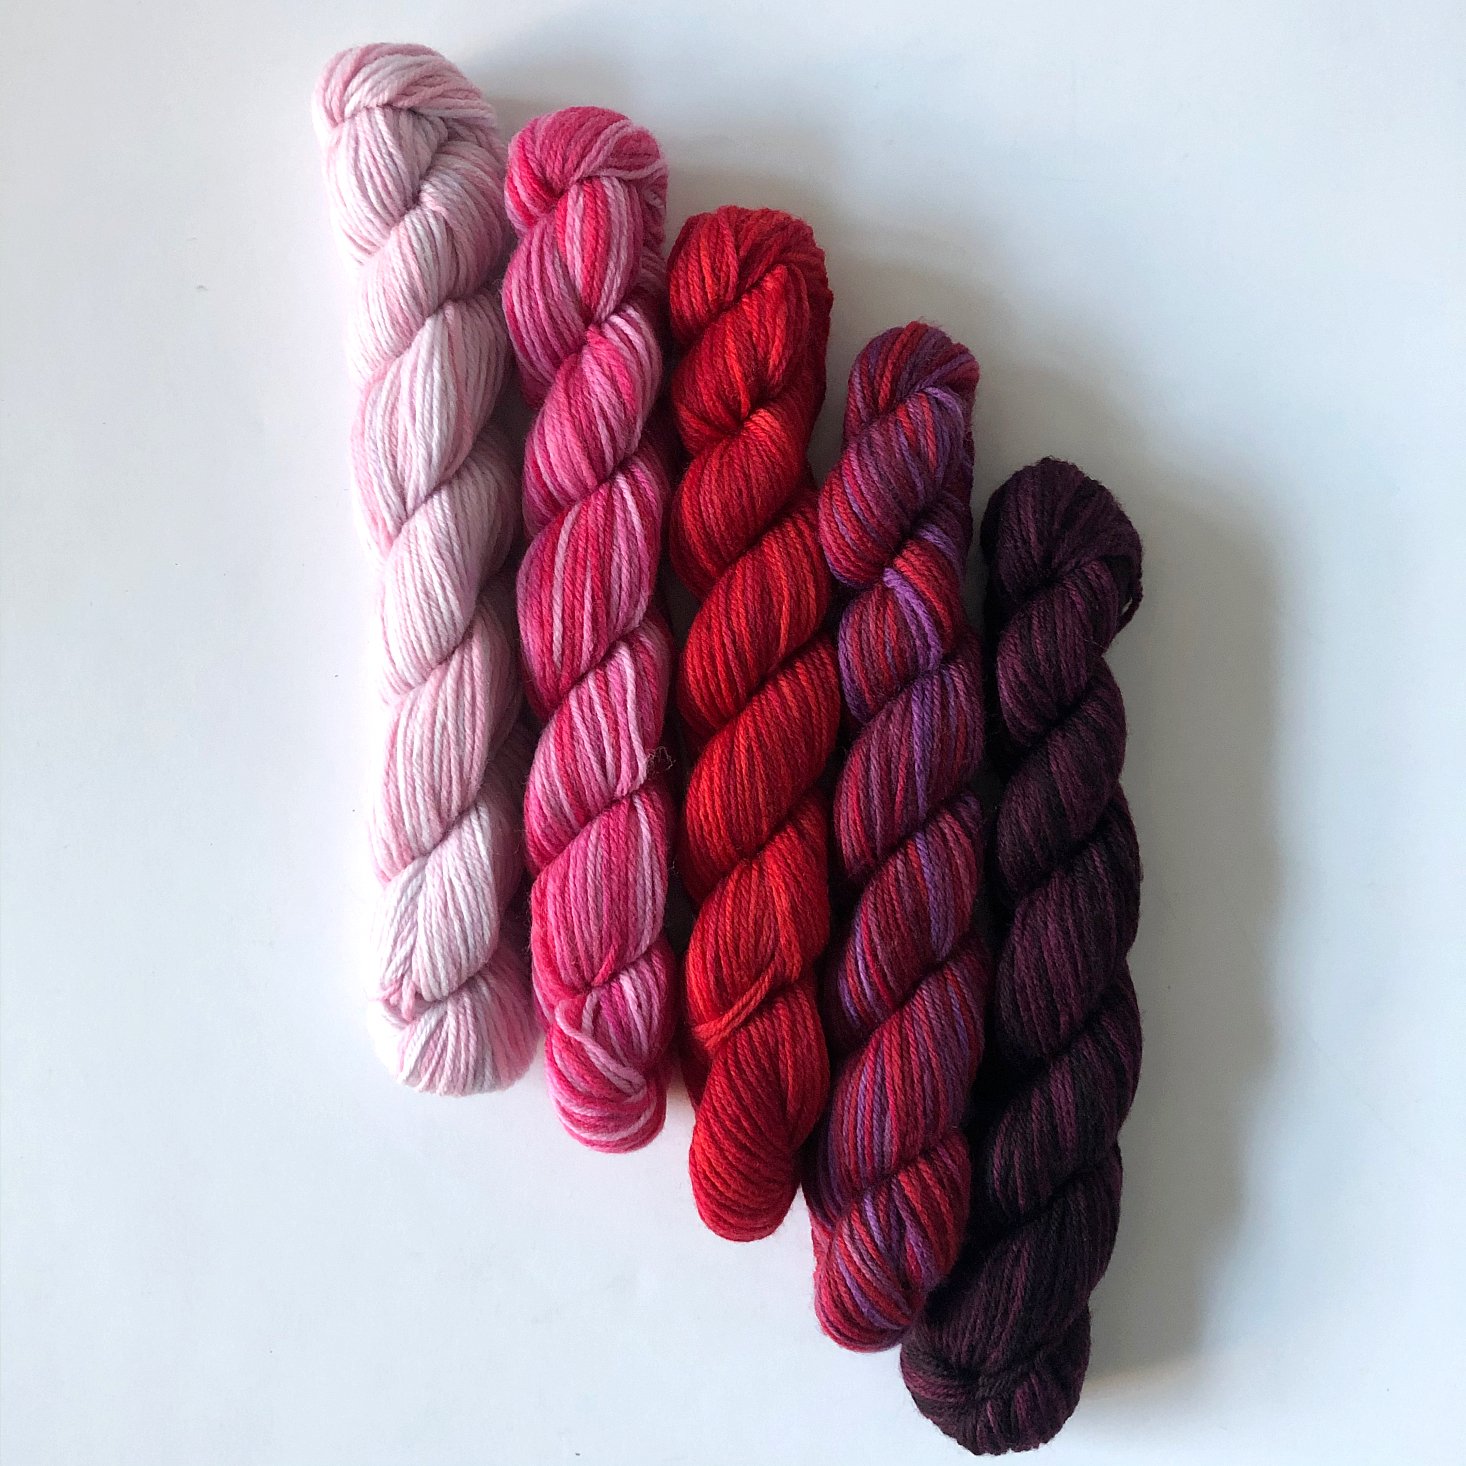 Knit Picks Review October 2019 red minis two